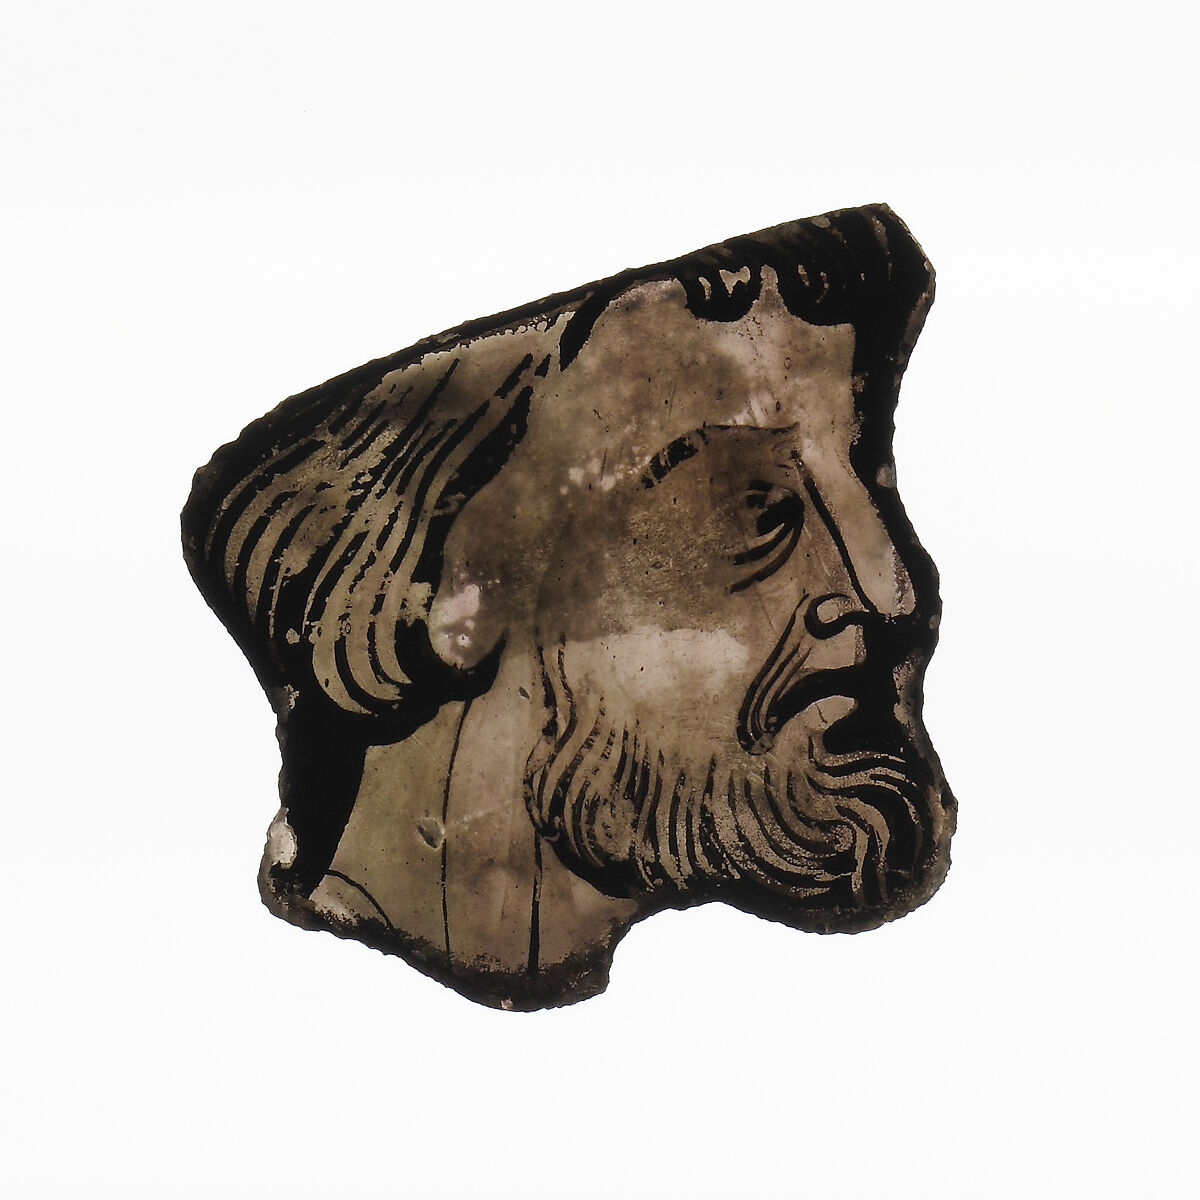 Profile of a Bearded Man, Pot metal glass, vitreous paint, stain on back, French